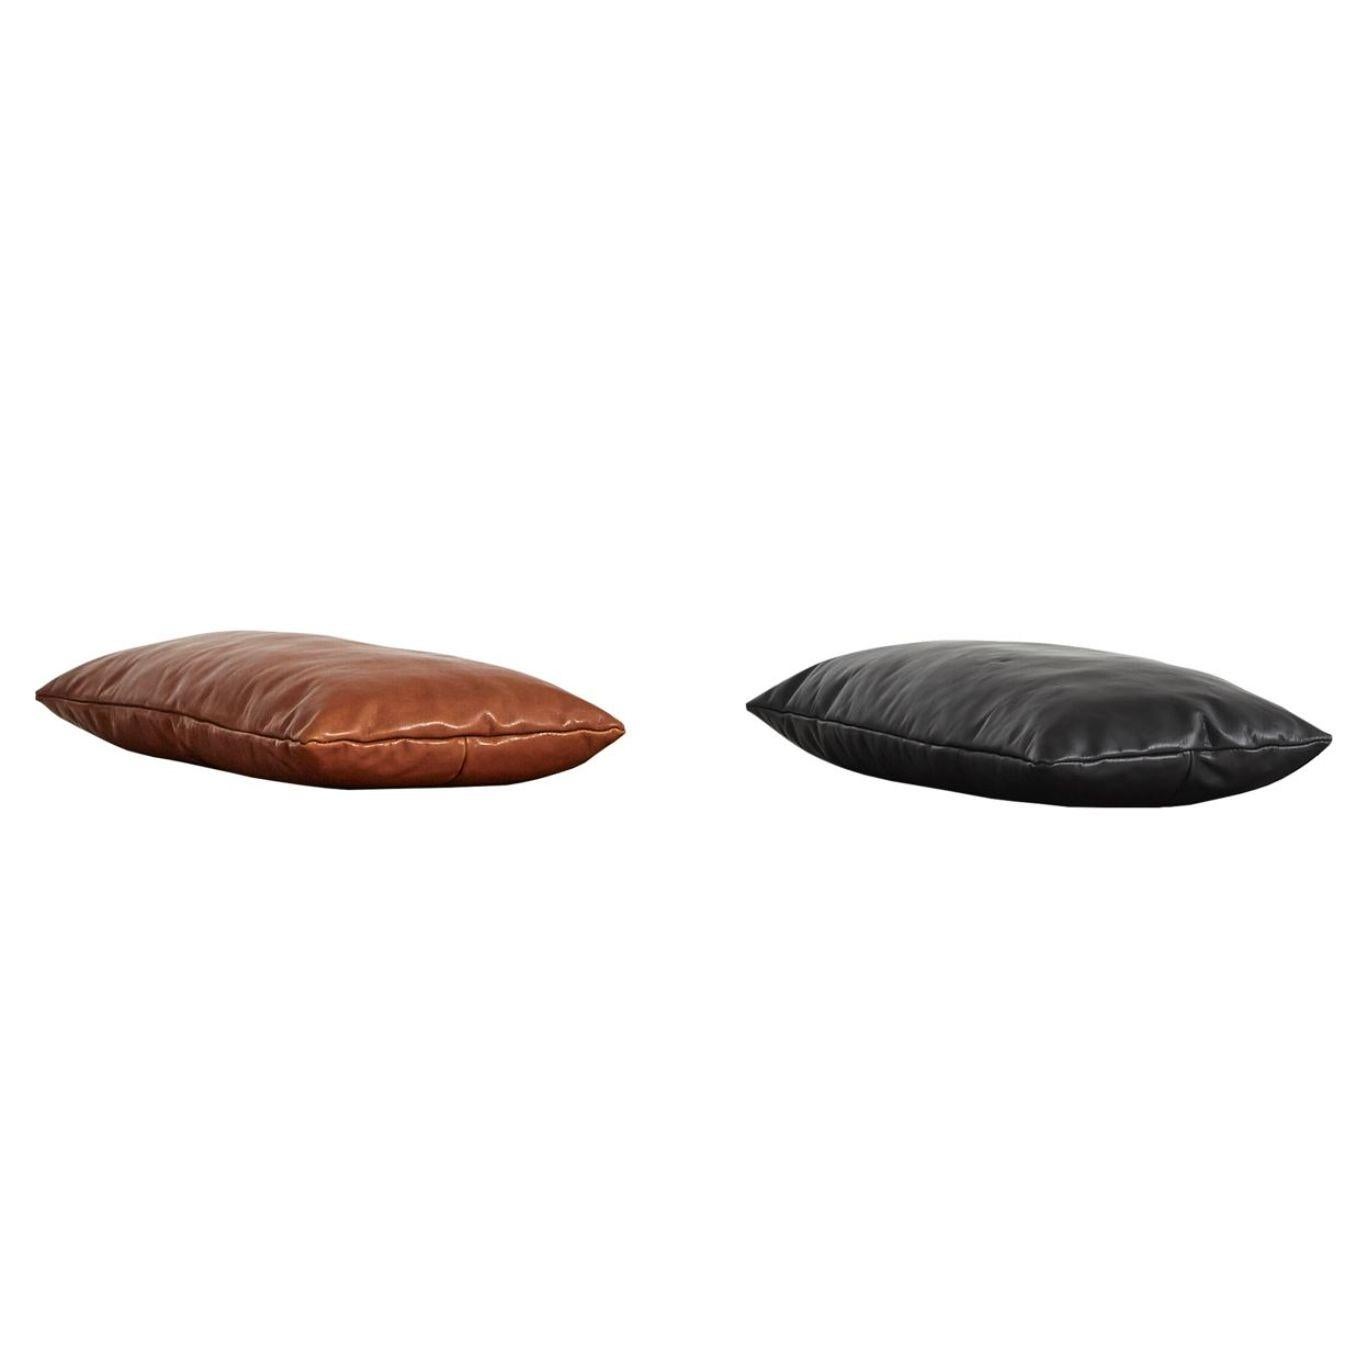 Set of 2 nought / black level pillows by Msds Studio.
Materials: Camo Leather.
Dimensions: D 23.5 x W 67 x H 8.5 cm.

The founders, Mia and Torben Koed, decided to put their 30 years of experience into a new project. It was time for a change and